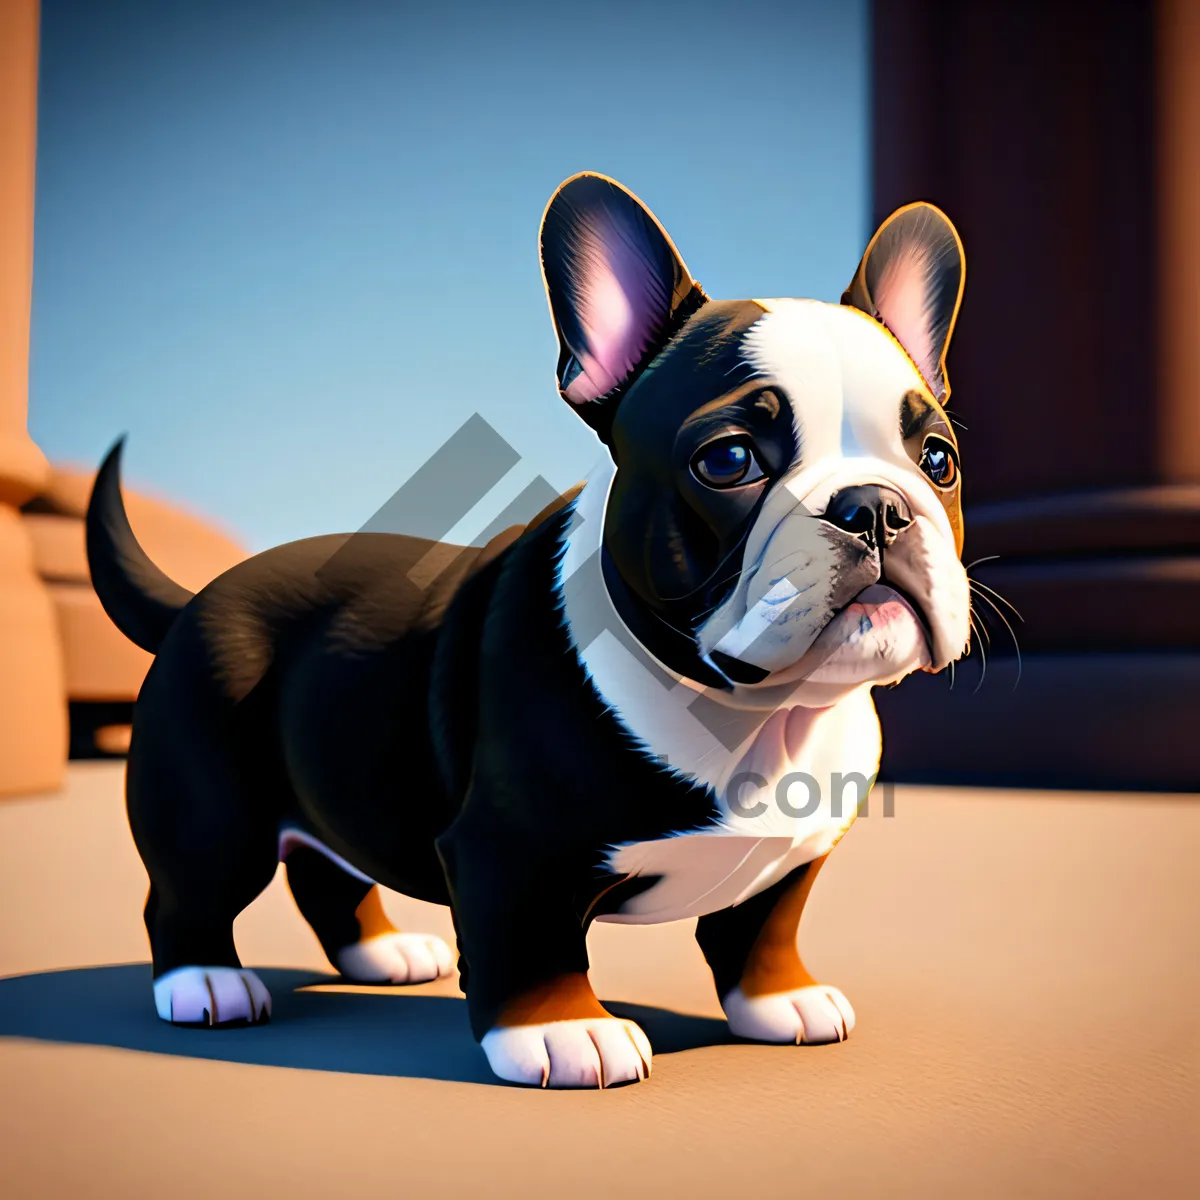 Picture of An utterly adorable purebred bulldog puppy with a captivating black and white coat